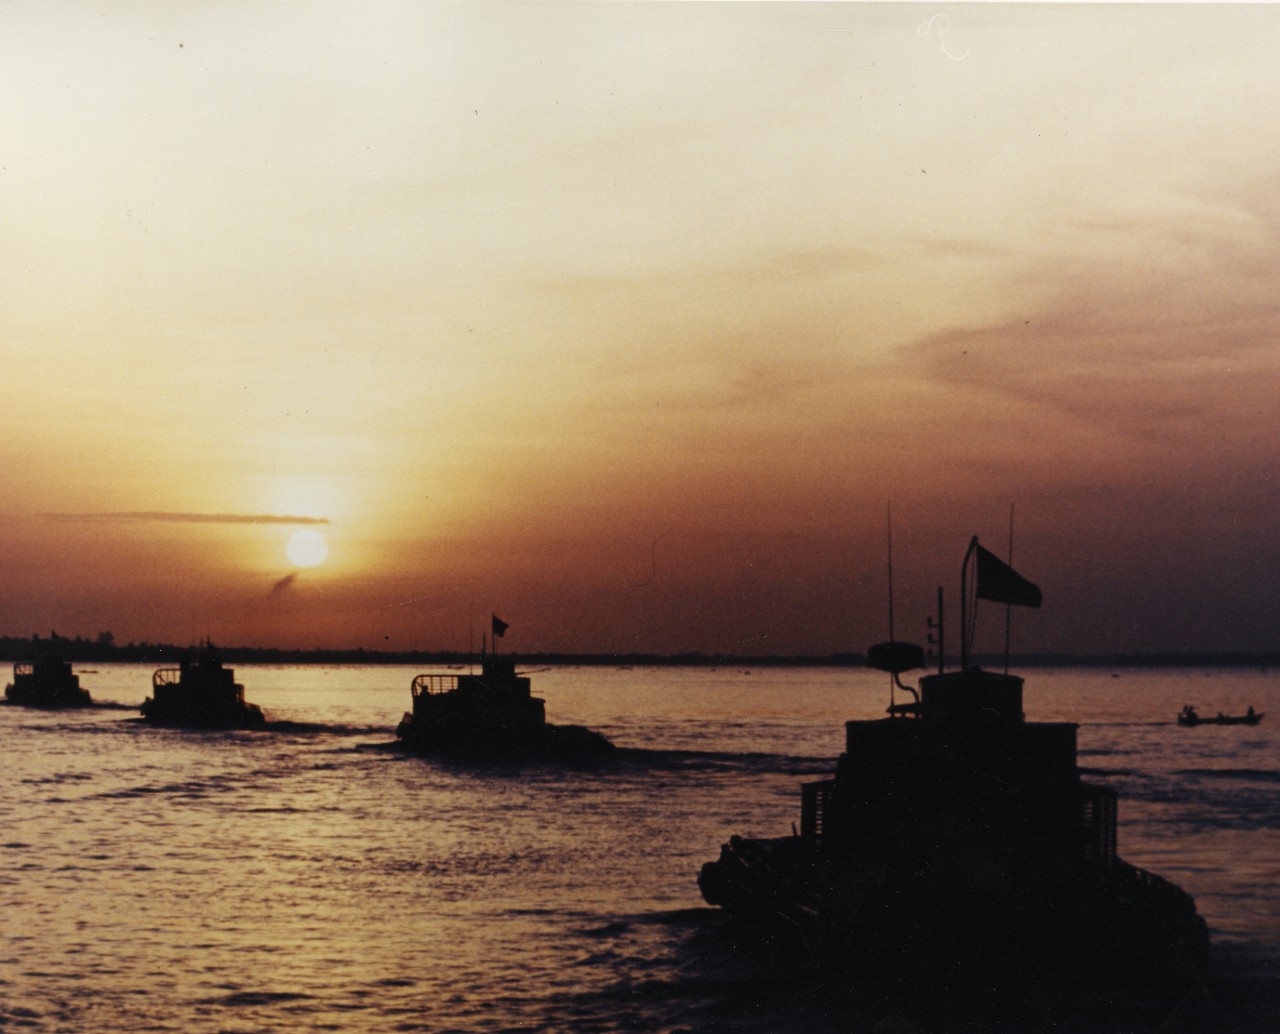 A line of boats moves along the water with a sunset behind them